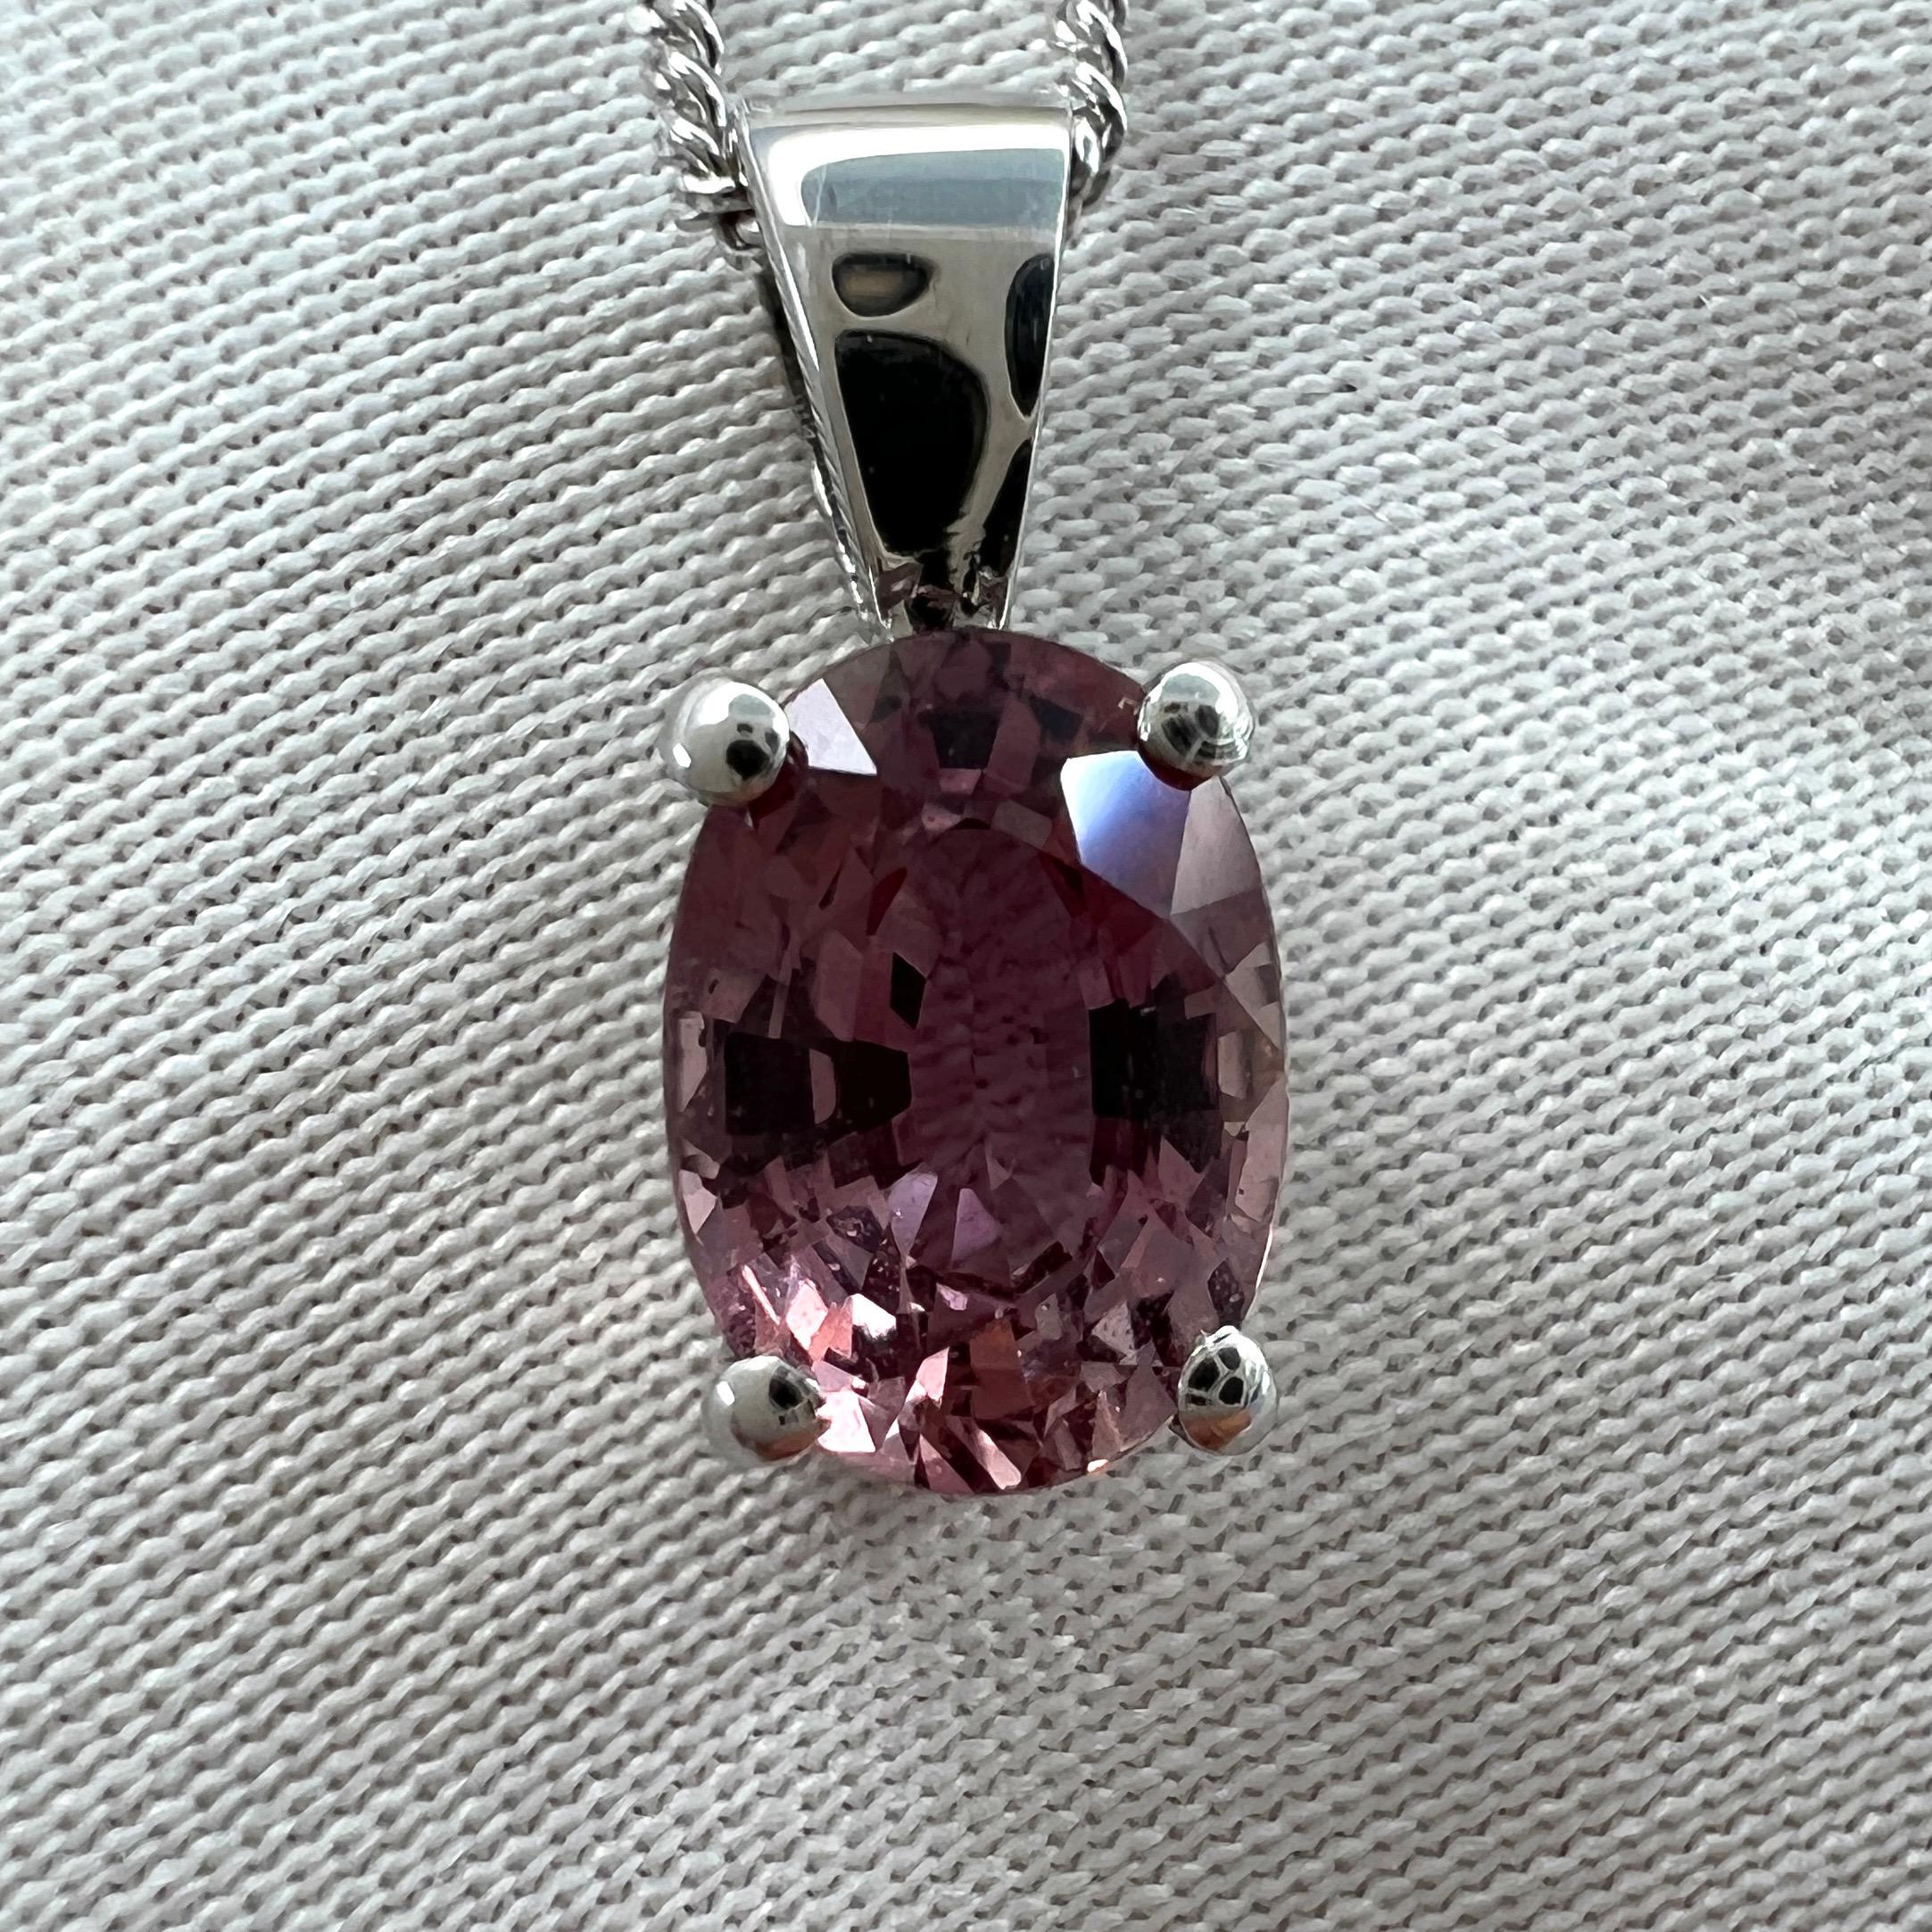 Vivid Pink Purple Untreated Sapphire 18k White Gold Pendant Necklace.

A fine IGI certified 1.05 carat untreated sapphire with a beautiful vivid pink purple colour.

The sapphire also has an excellent oval cut with excellent clarity, very clean